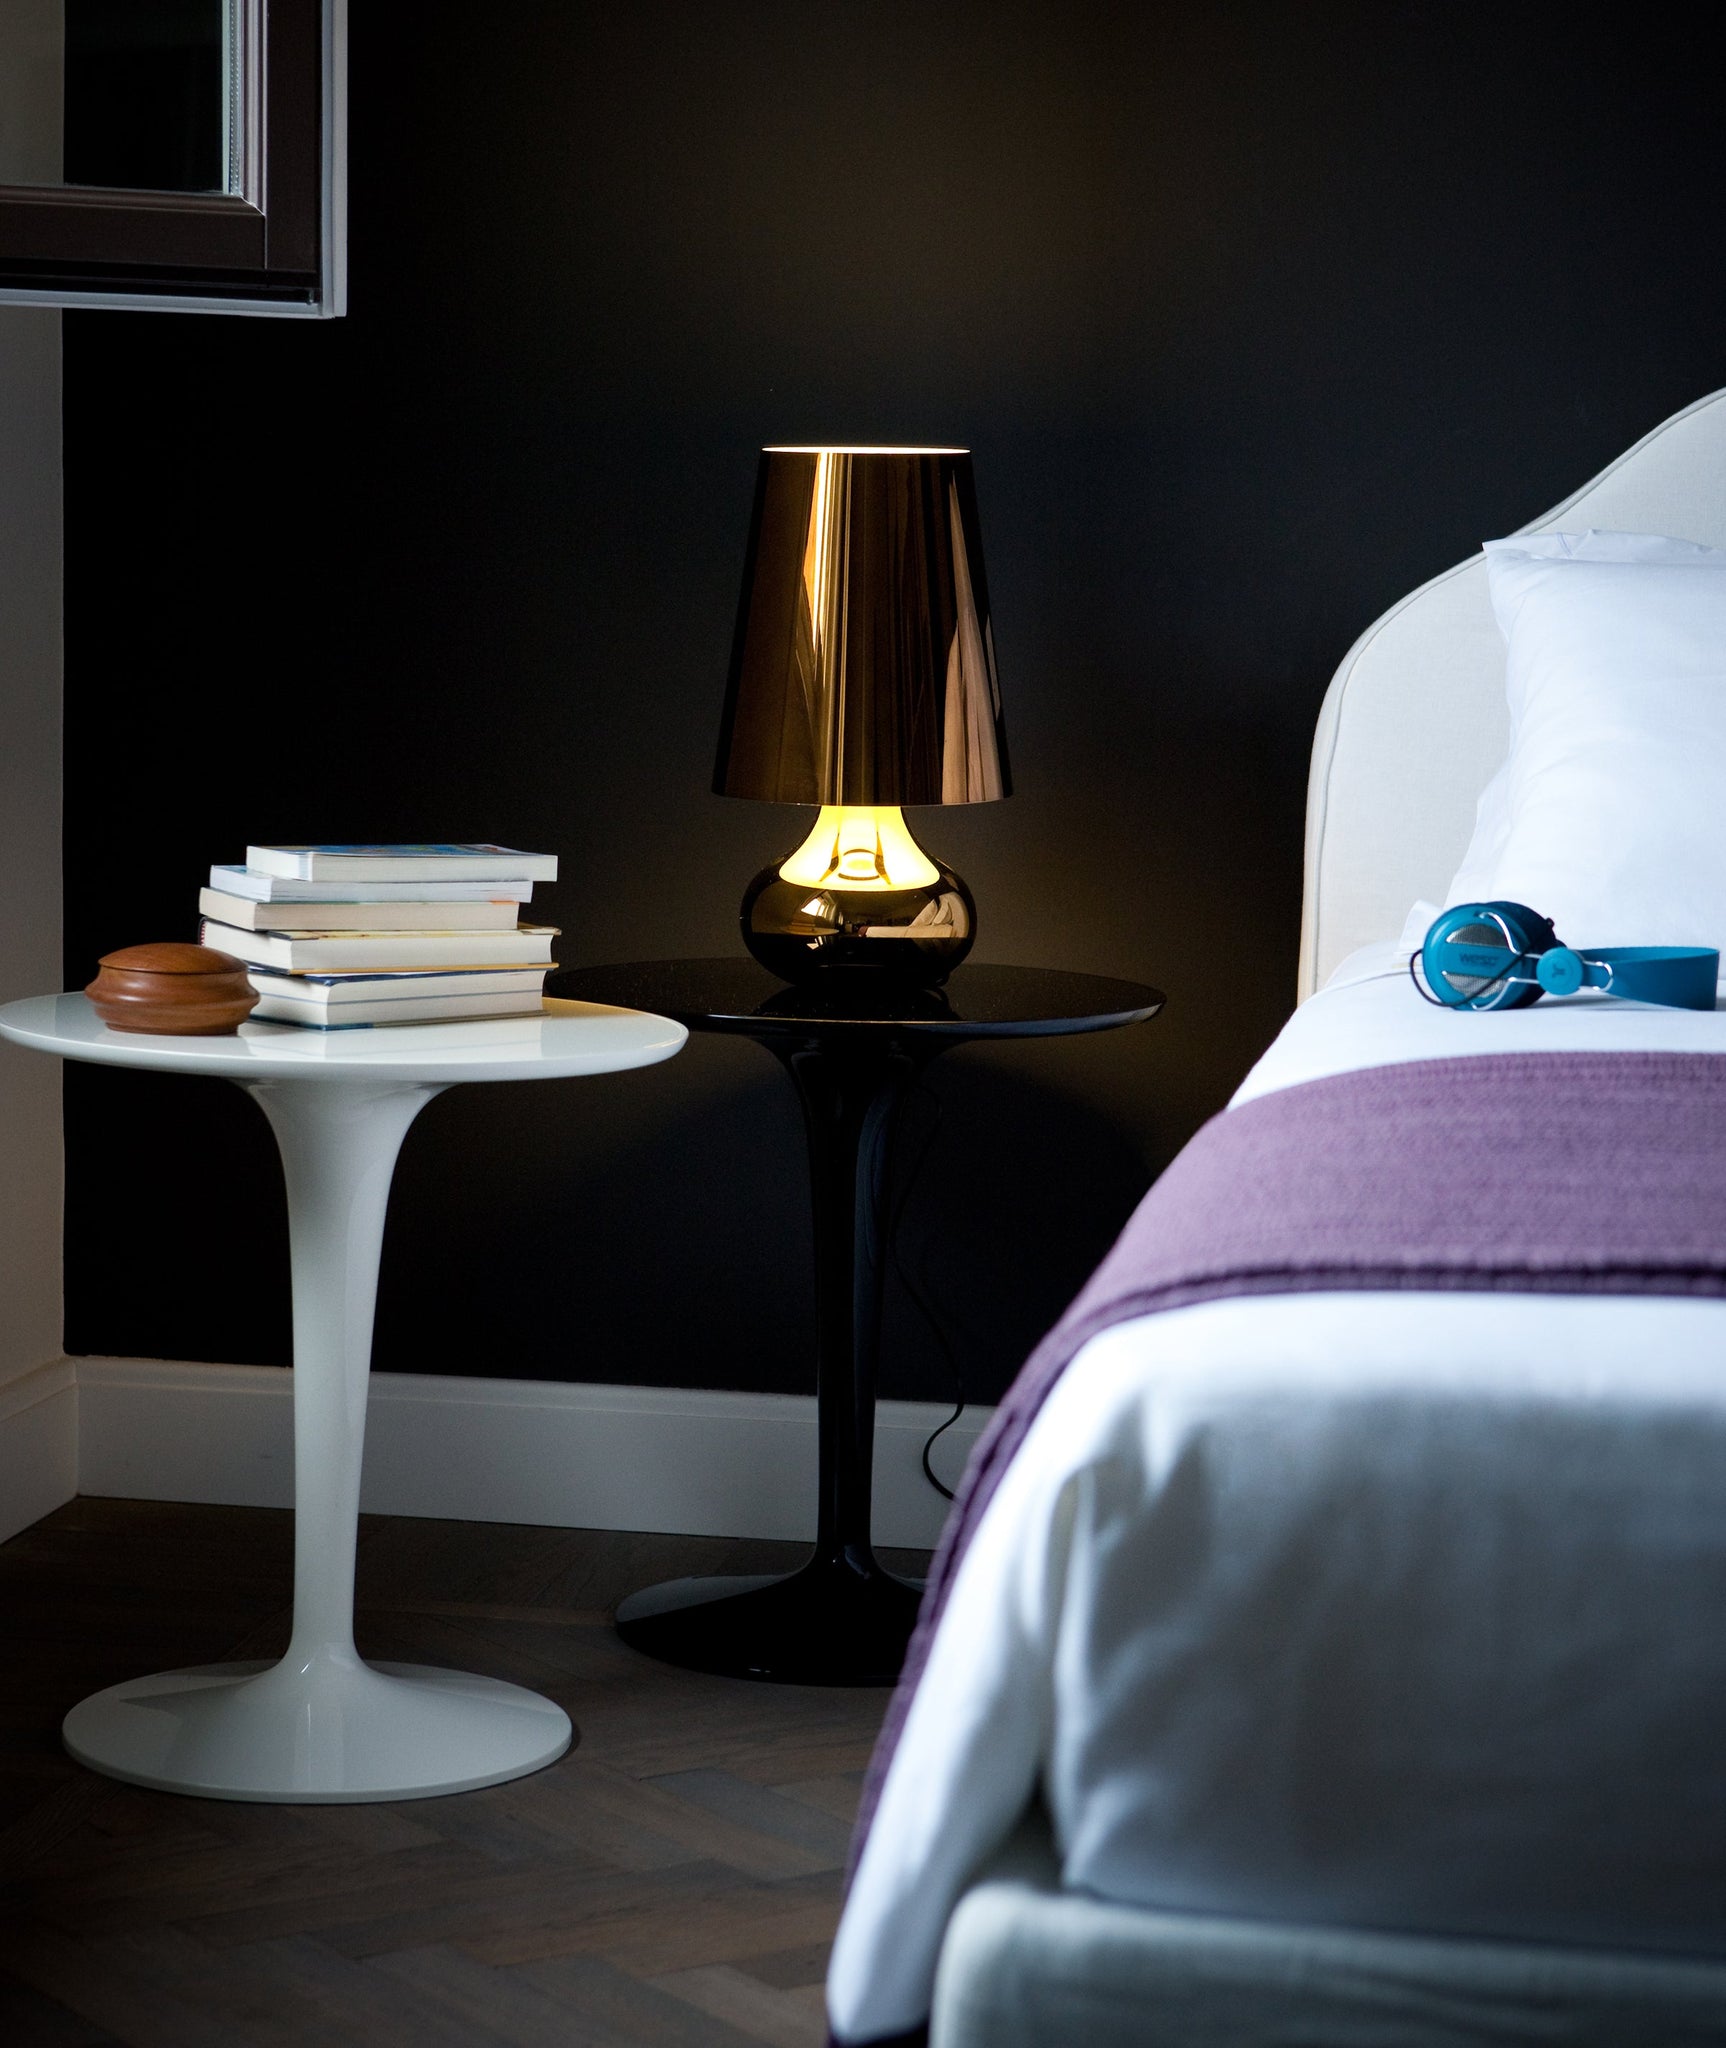 Cindy Table Lamp - More Options